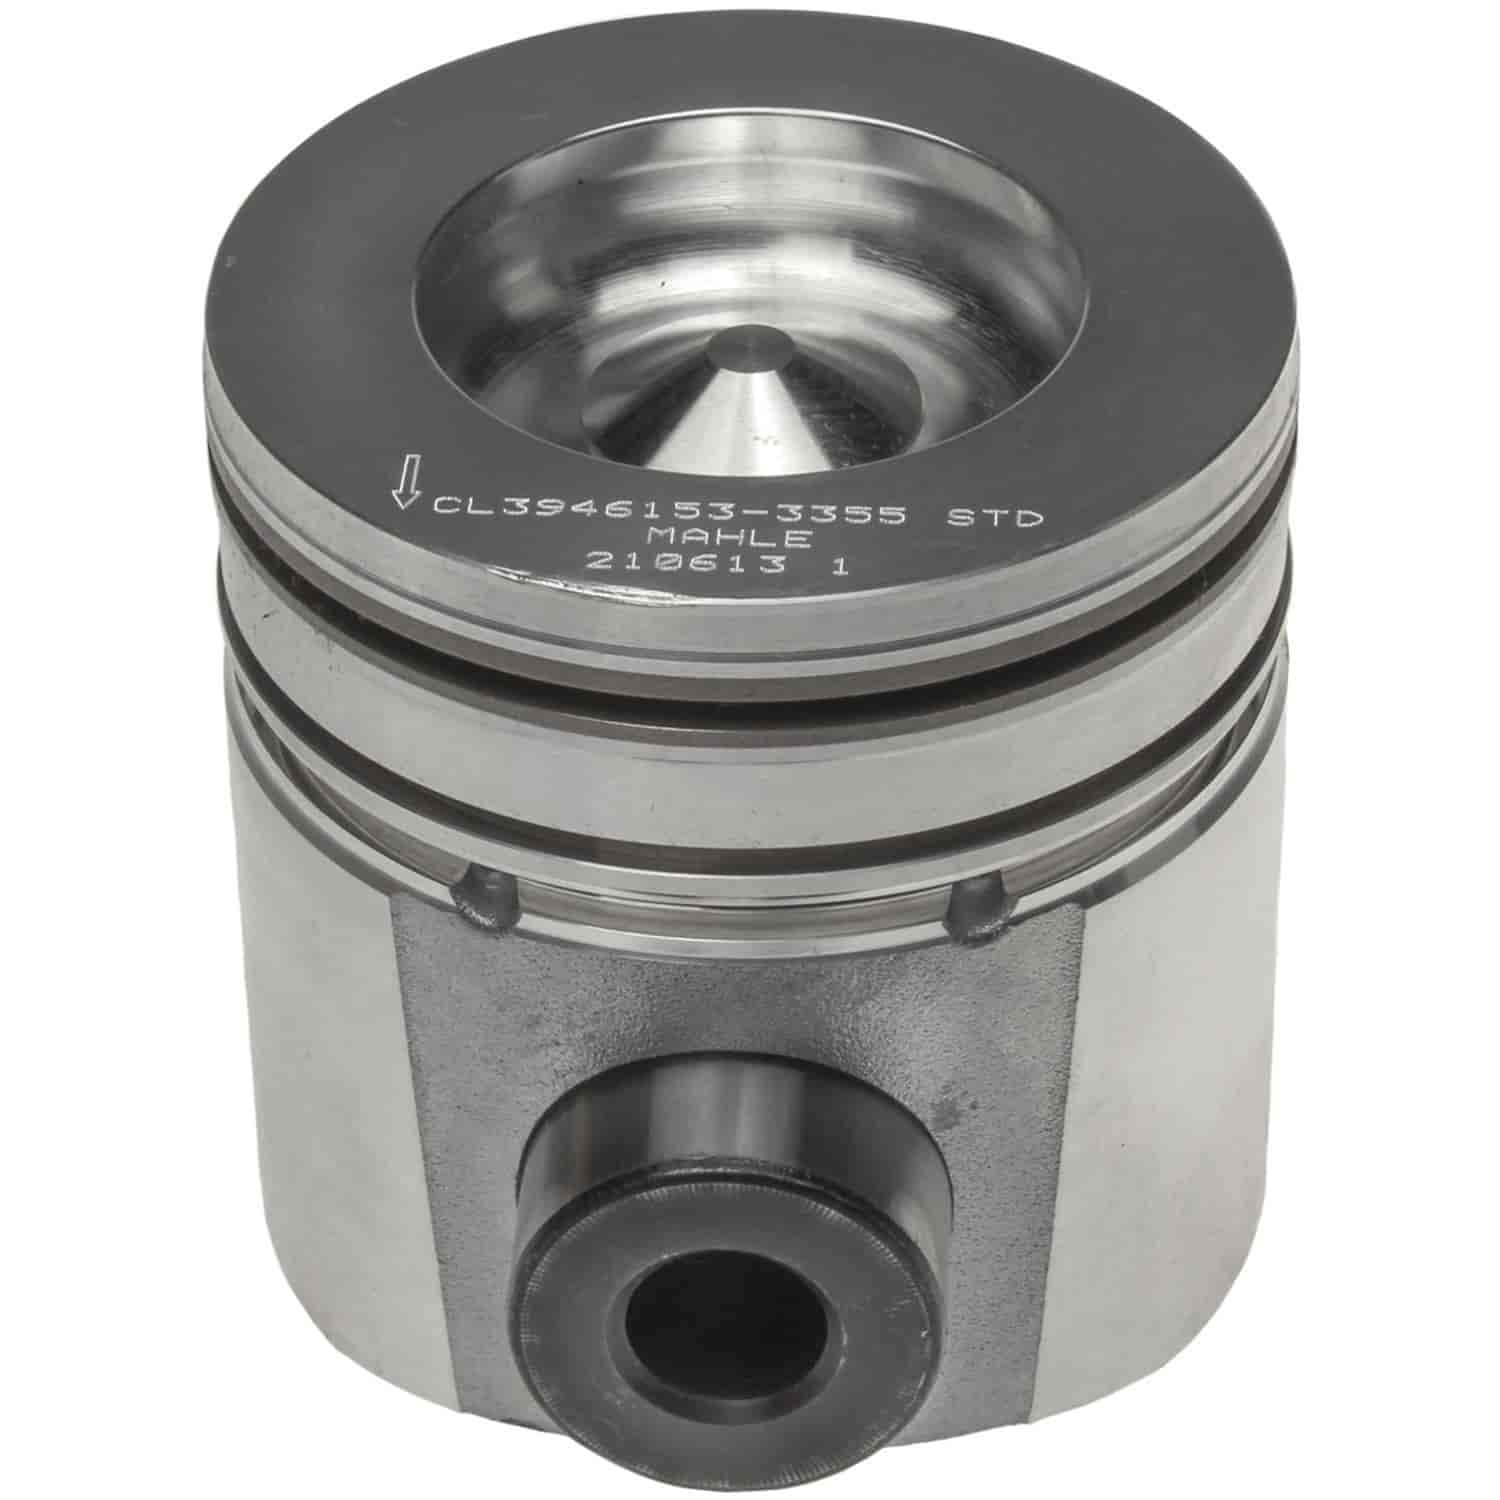 Piston and Rings Set 1998-2002 Dodge, Fits Cummins Diesel L6 5.9L with 4.036" Bore (+.020")